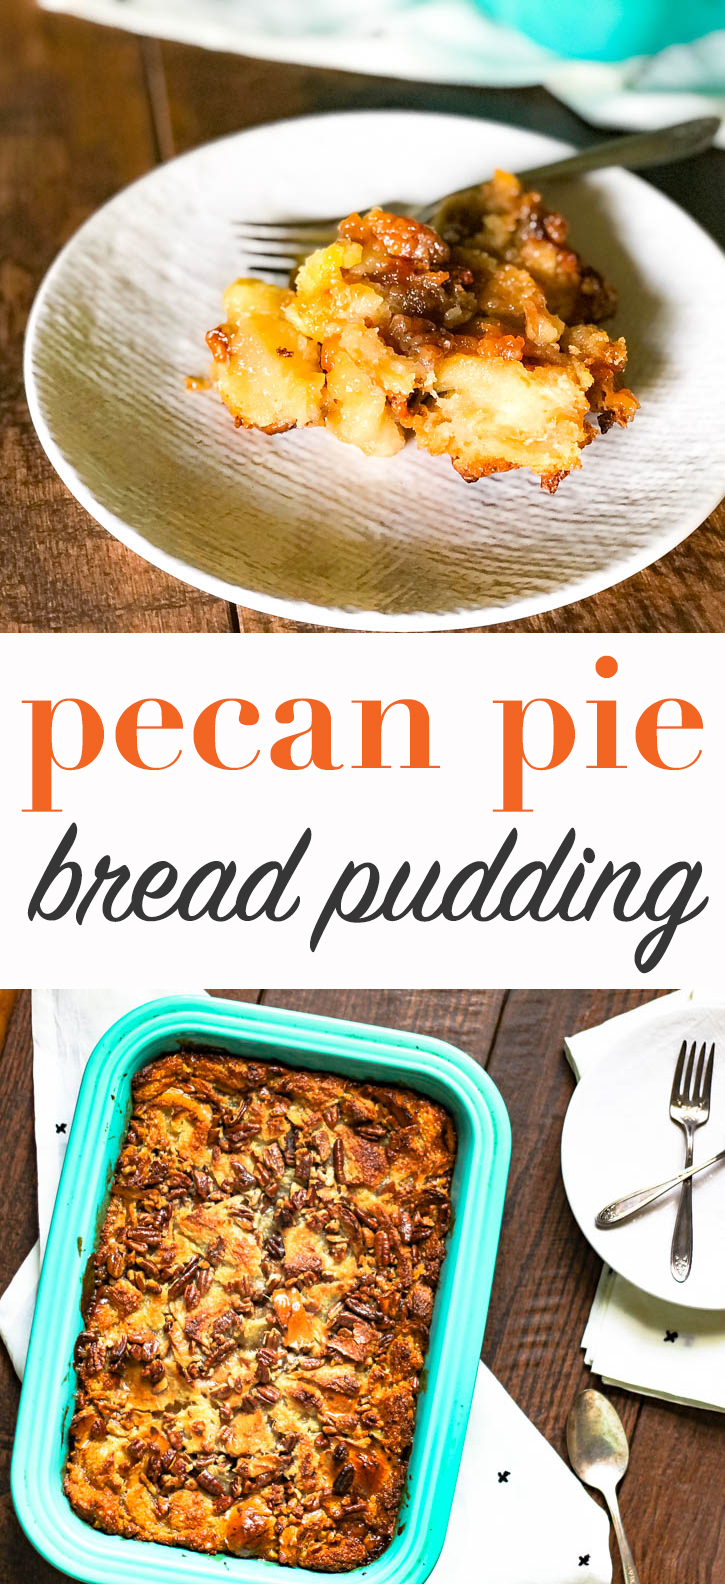 Love Pecan Pie? Pecan Pie Bread Pudding is EVEN BETTER! And it's so easy to make. WARNING: It's highly addictive!